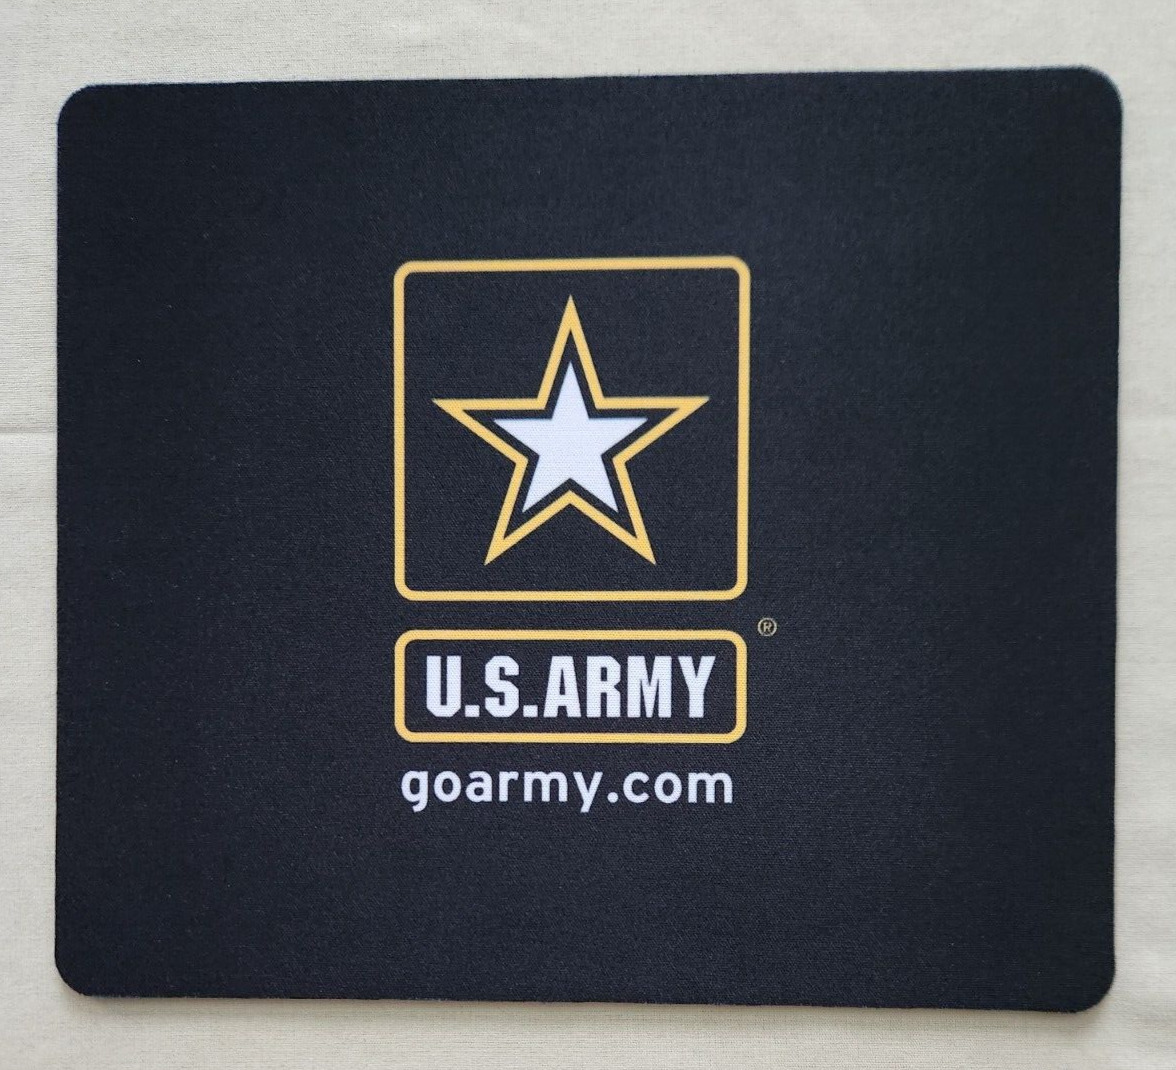 US Army Star Insignia Computer Mouse Pad - NEW - FREE S&H